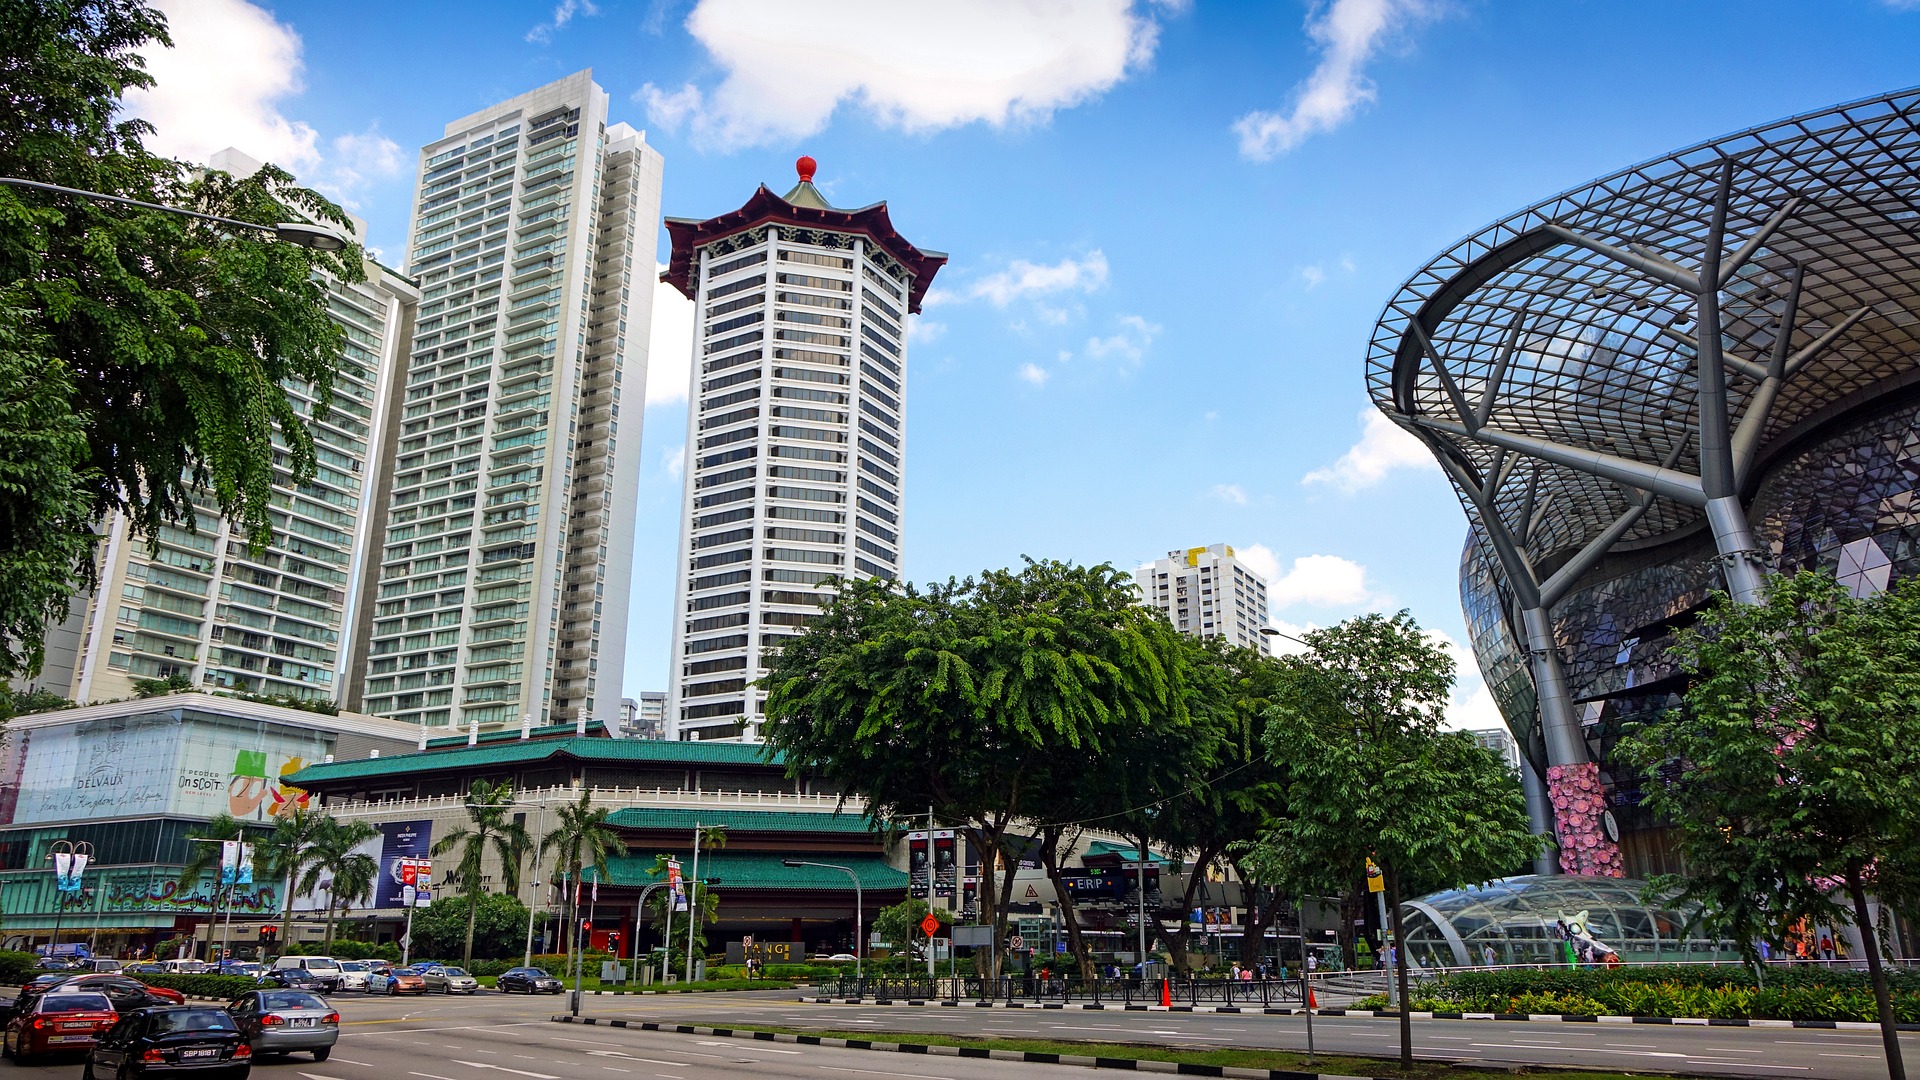 Orchard Road, Singapore - Things to buy